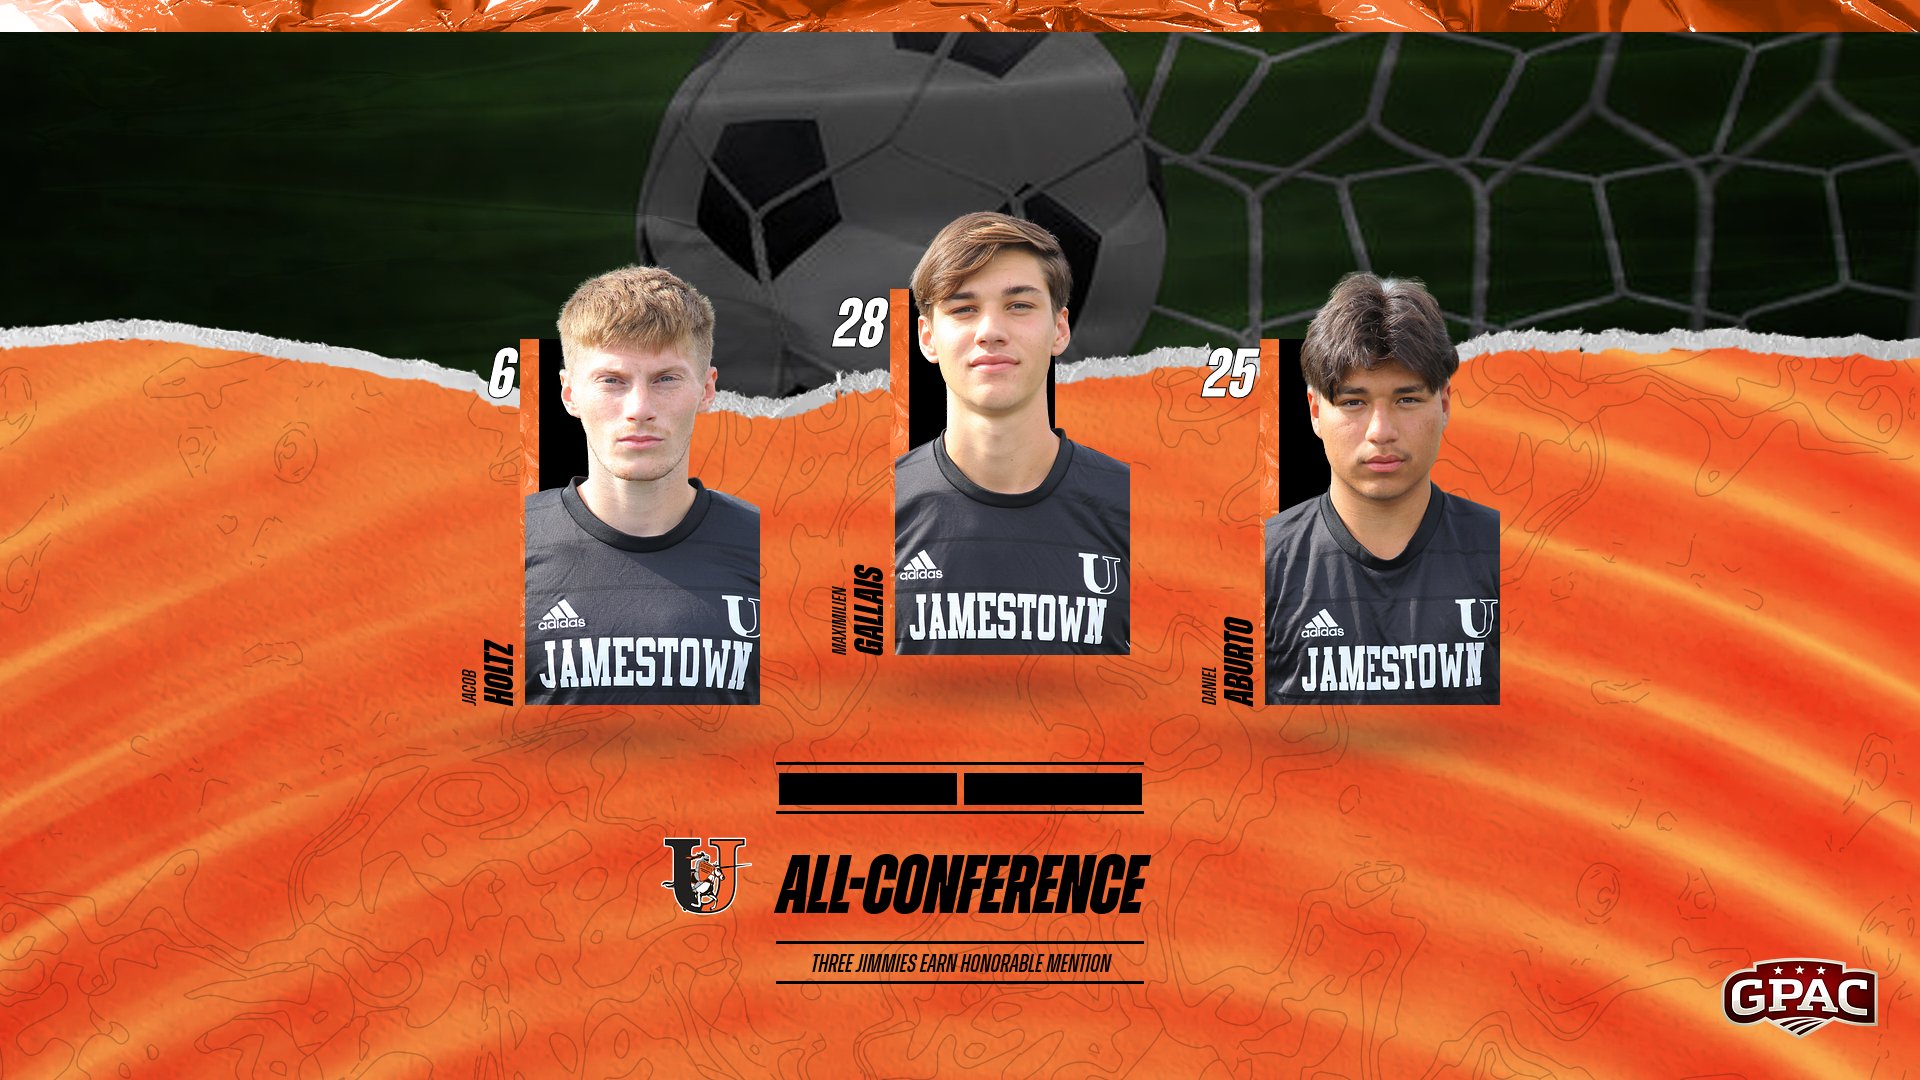 Aburto, Gallais, Holtz named GPAC All-Conference honorable mention